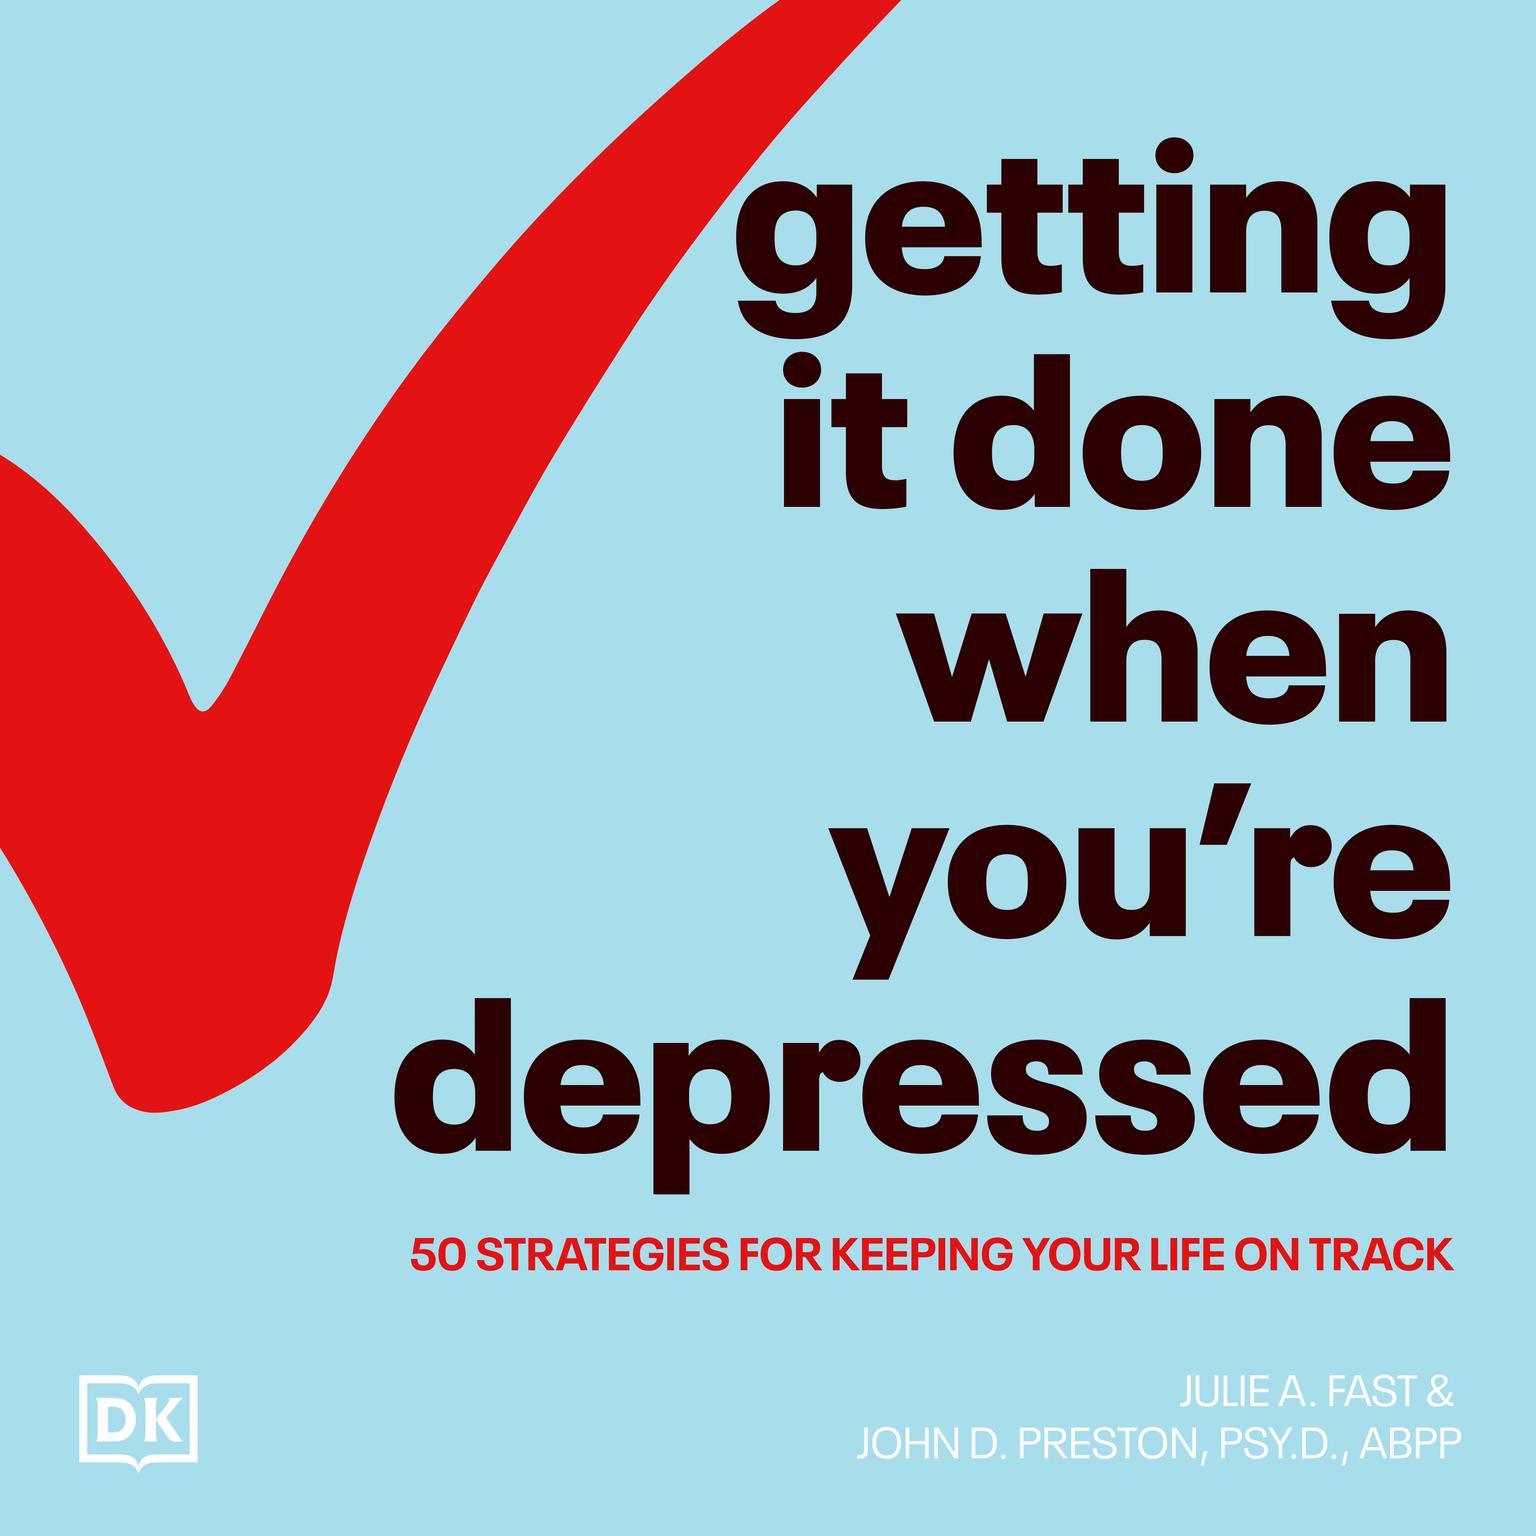 Getting It Done When Youre Depressed, Second Edition: 50 Strategies for Keeping Your Life on Track Audiobook, by Julie A. Fast